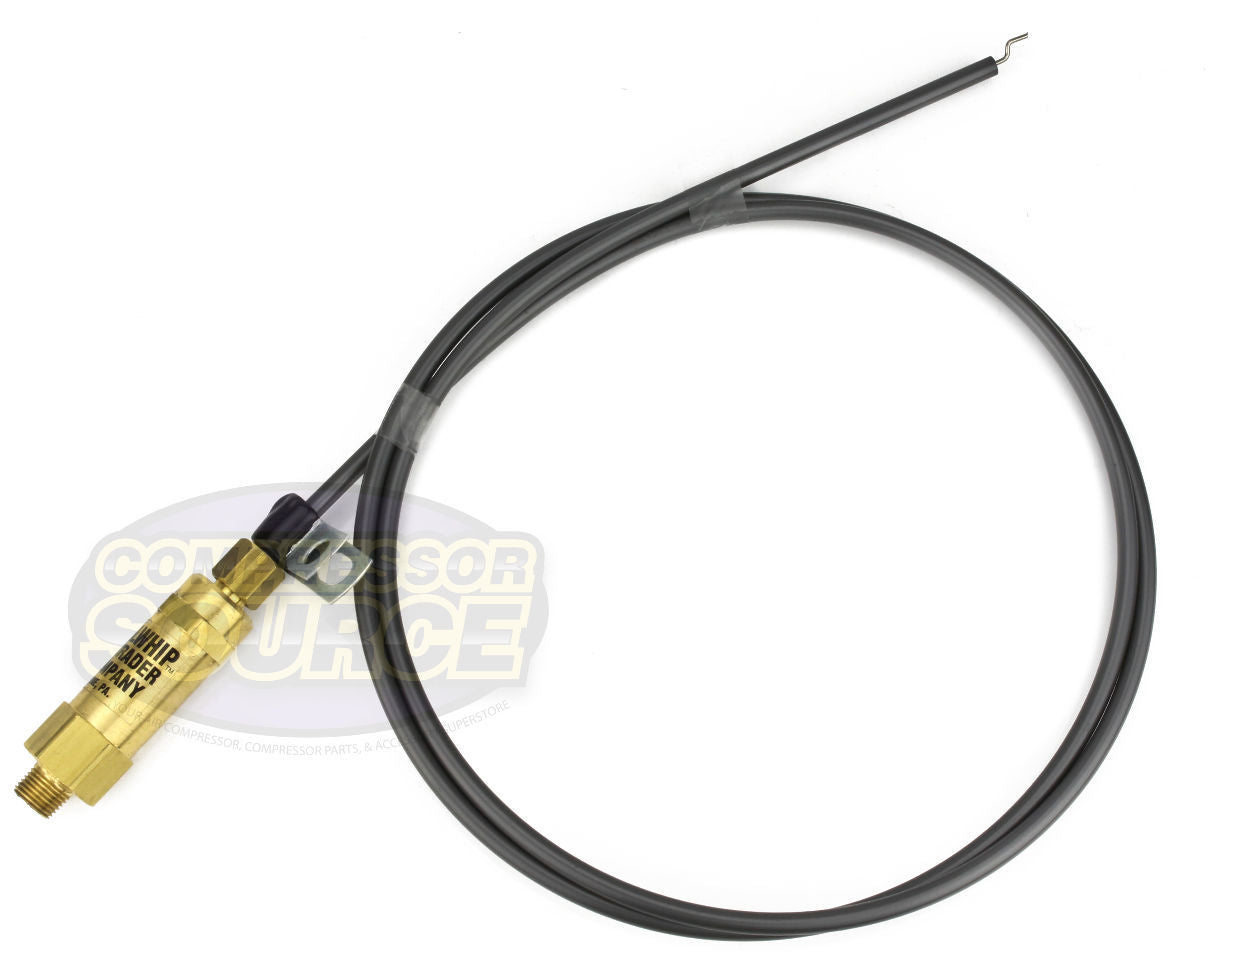 48" Inch Large Bullwhip Throttle Control Cable For Gas Air Compressors